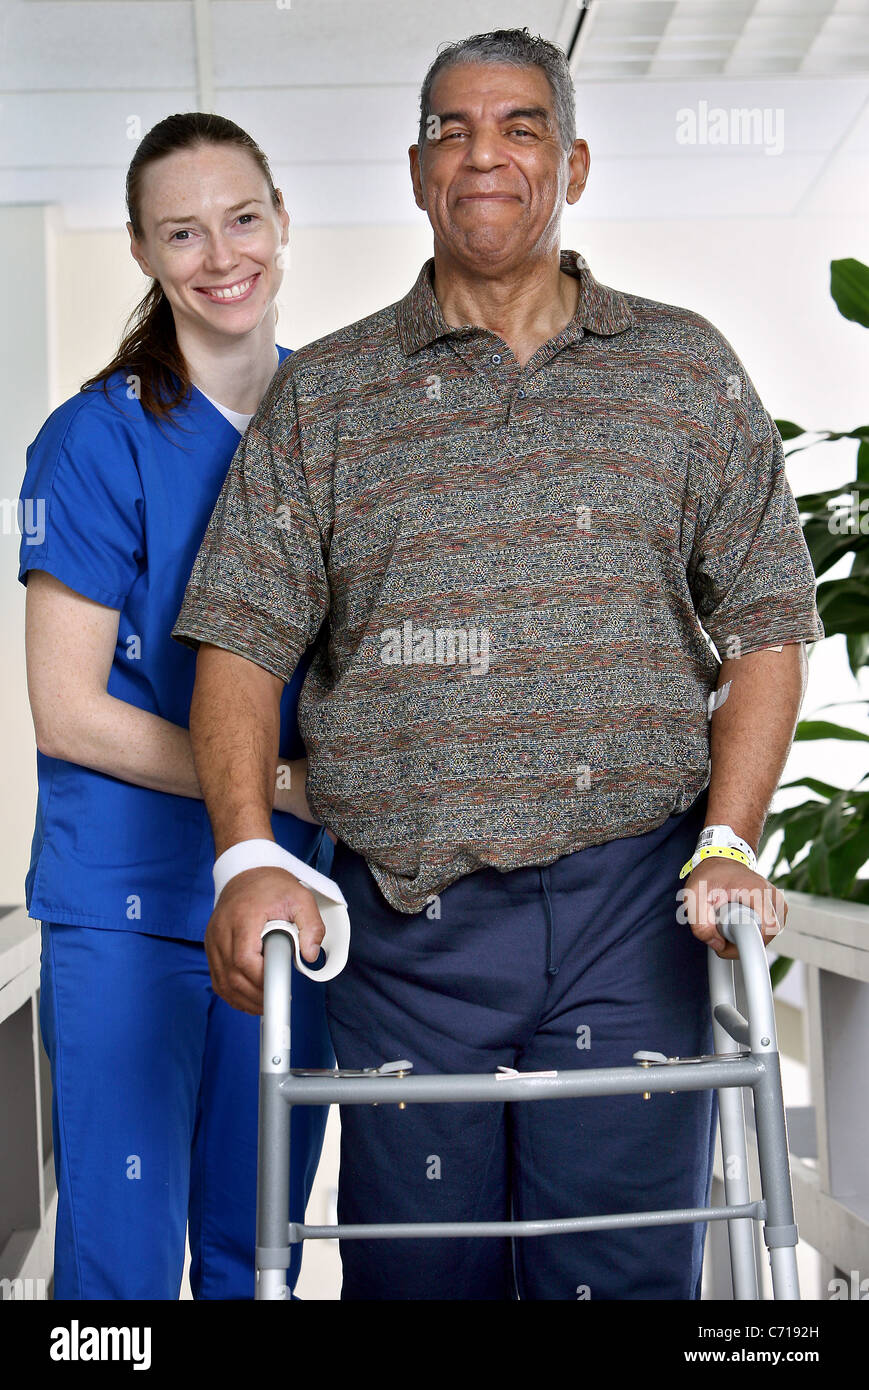 A physical therapist works with a patient. Stock Photo